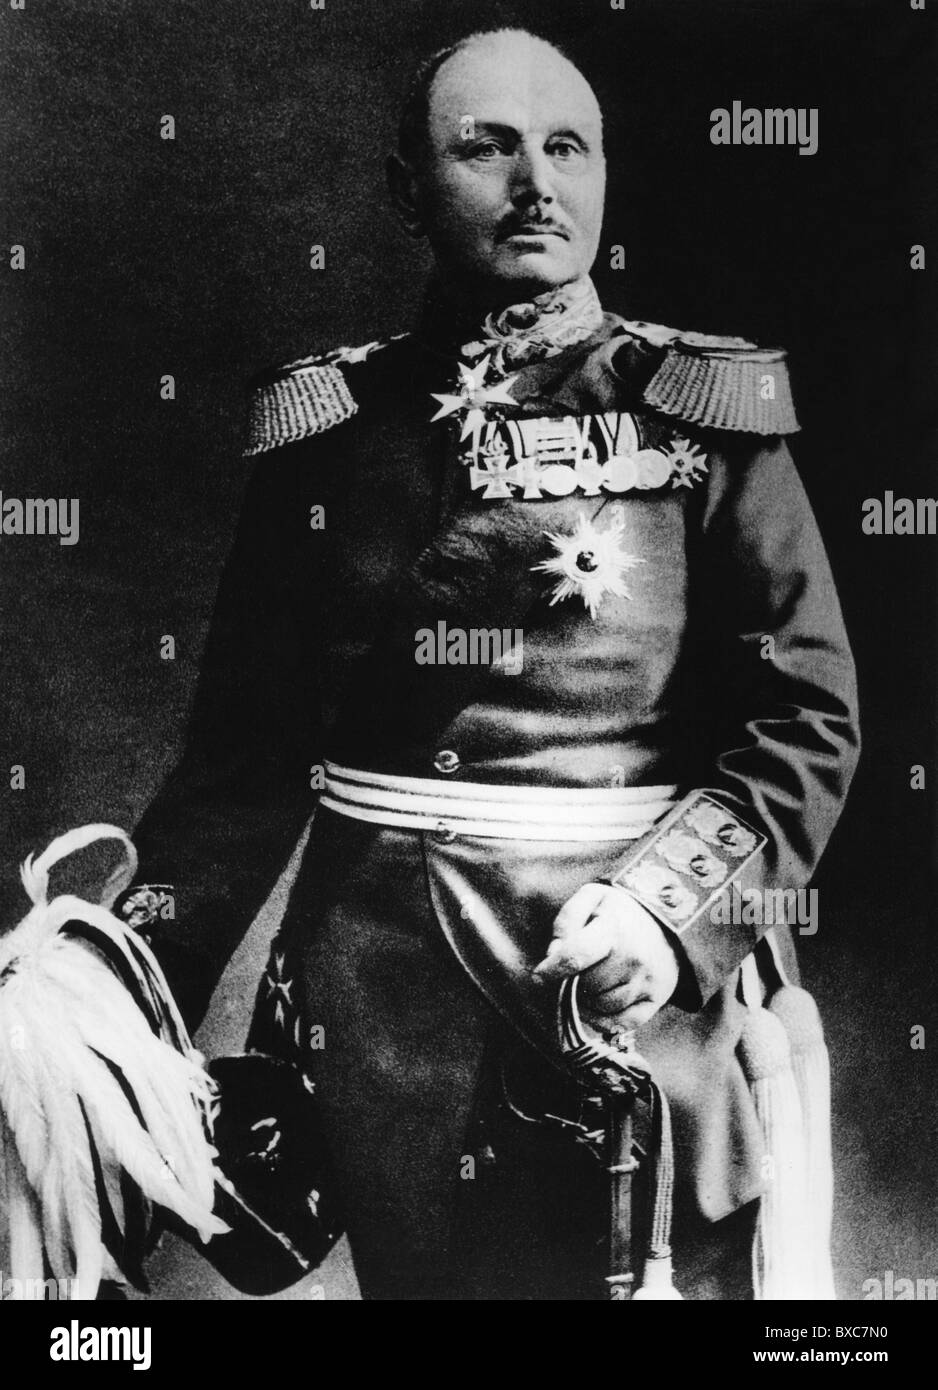 Kluck, Alexander von, 20.5.1846 - 19.10.1934, German general, commander of the 1st Army in 1914, half length by Brothers Haeckel, Berlin, Stock Photo